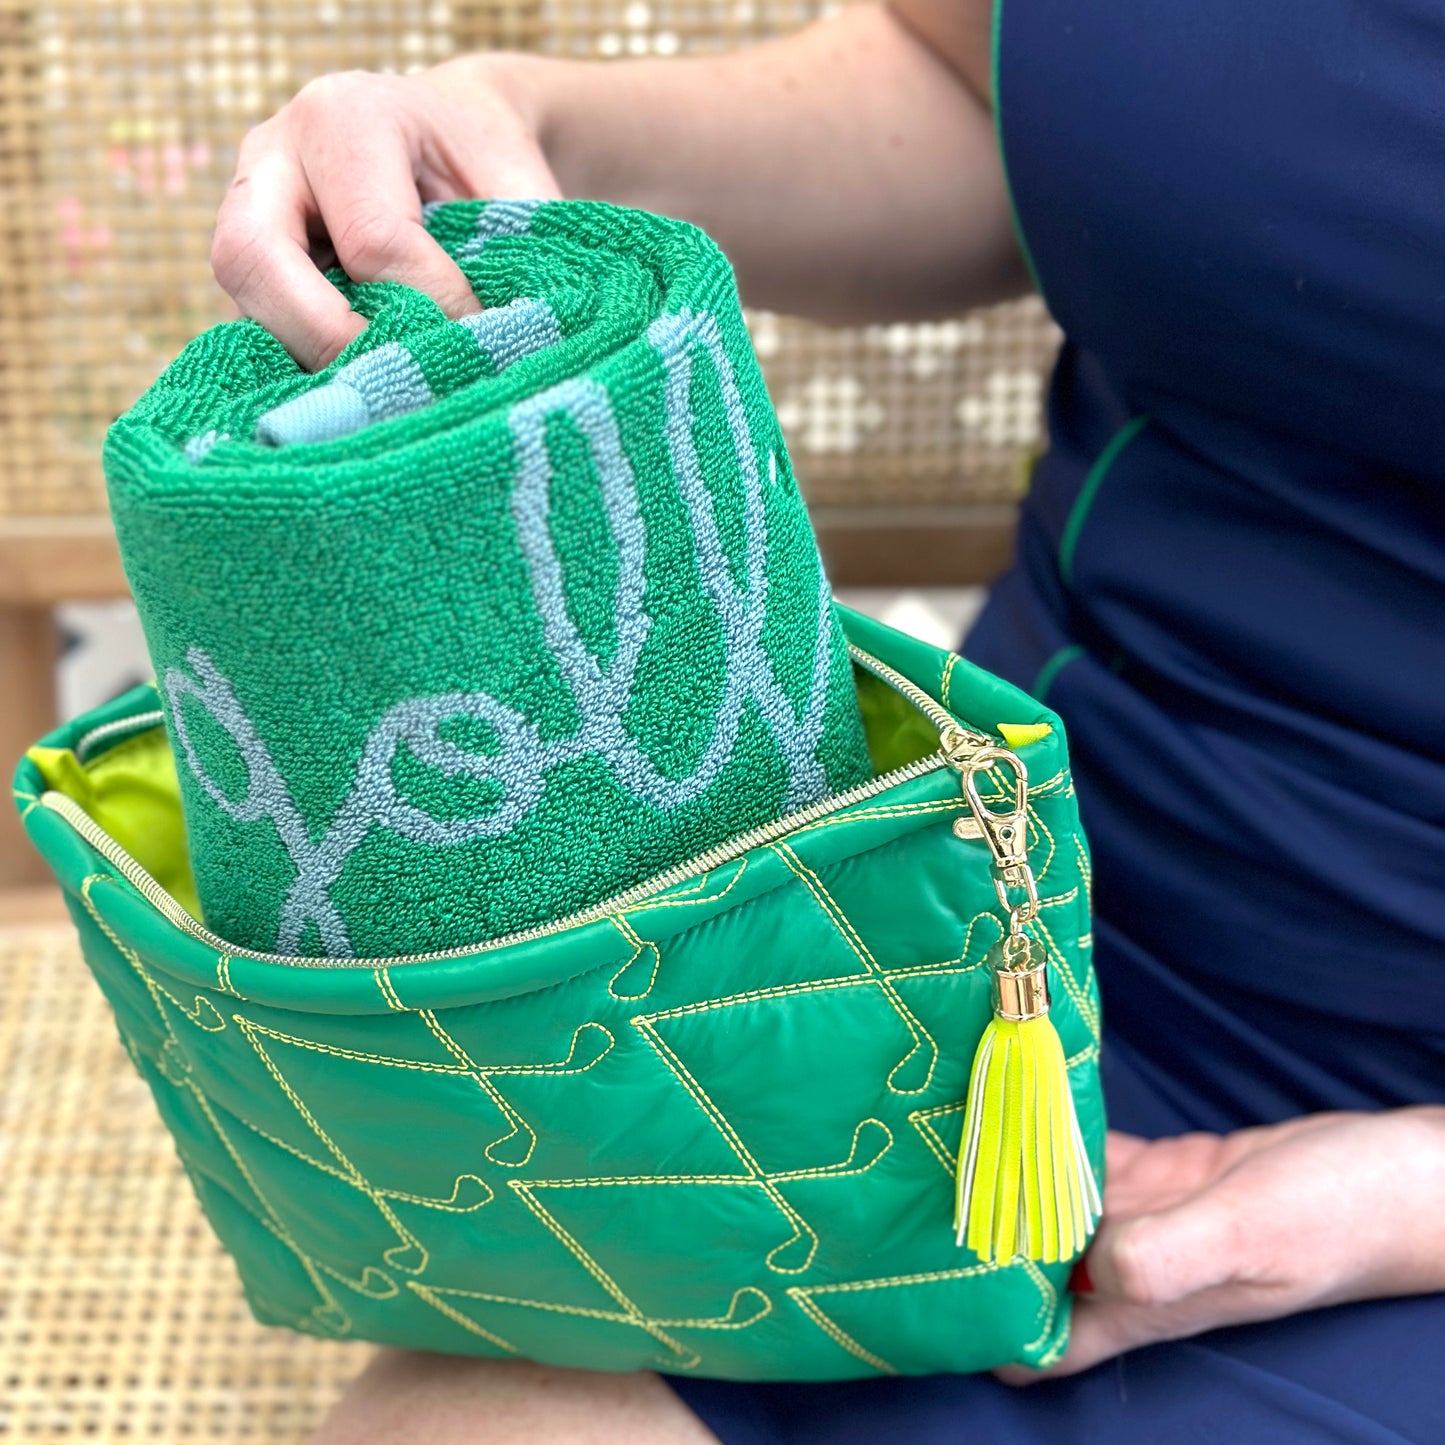 The Green Travel Pouch & Towel Set